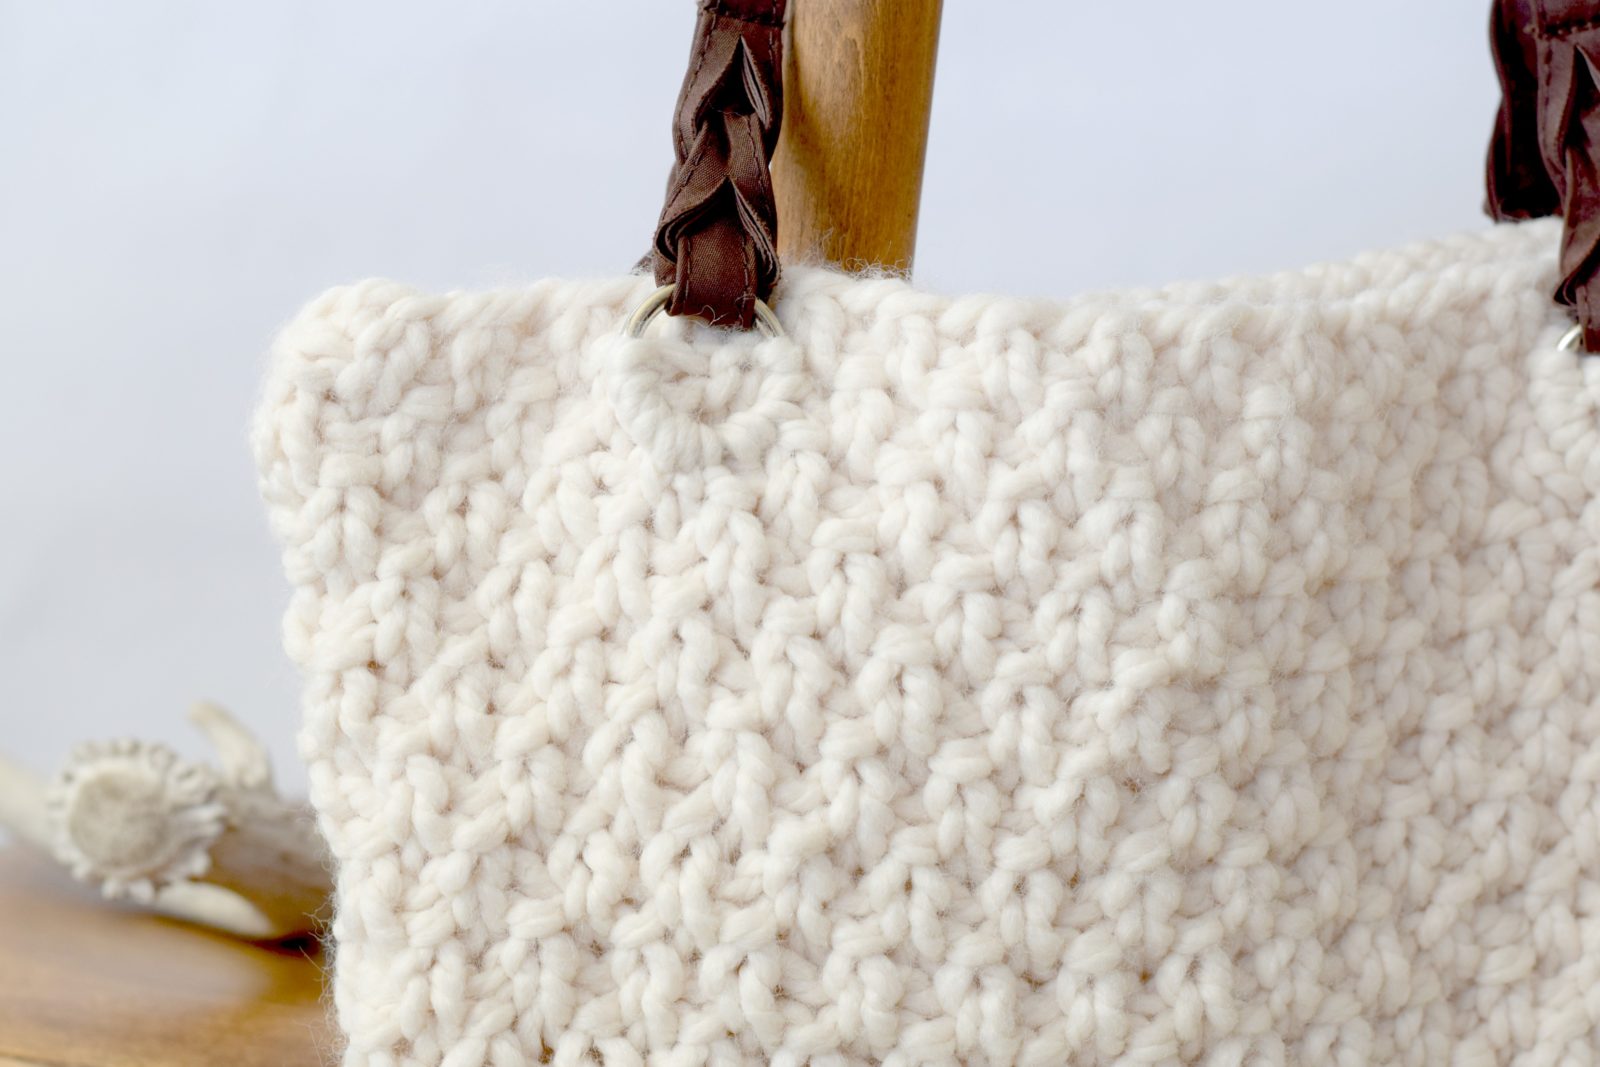 Knit a small bag with our free knitting pattern